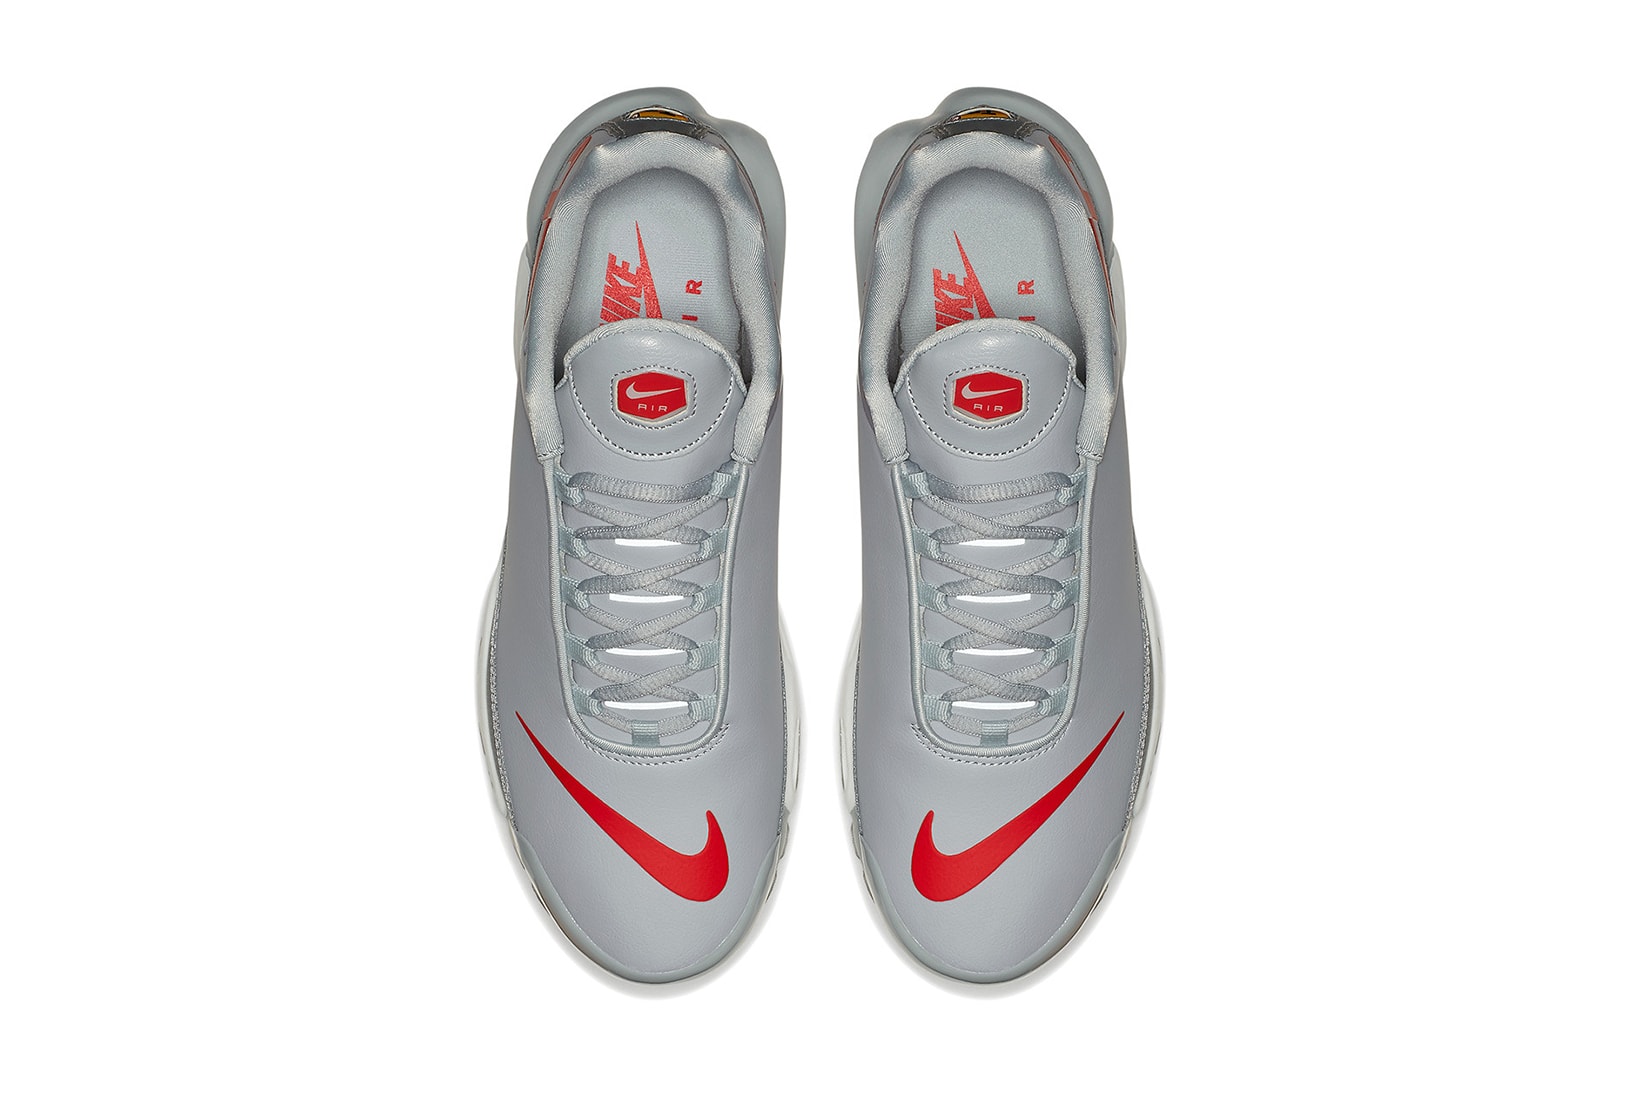 Nike Air Max Plus AQ1088 001 grey red white april may 2018 release date info drop sneakers shoes footwear